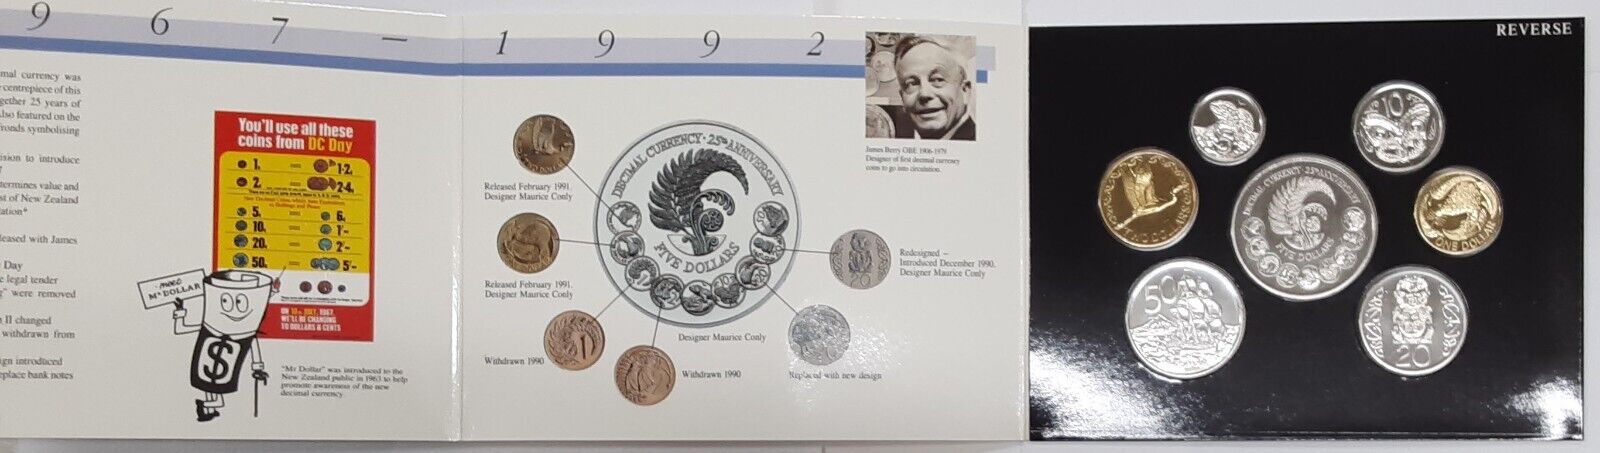 1992 Reserve Bank of New Zealand 25th Anniv. of Decimal 7 Coin Set BU in OGP